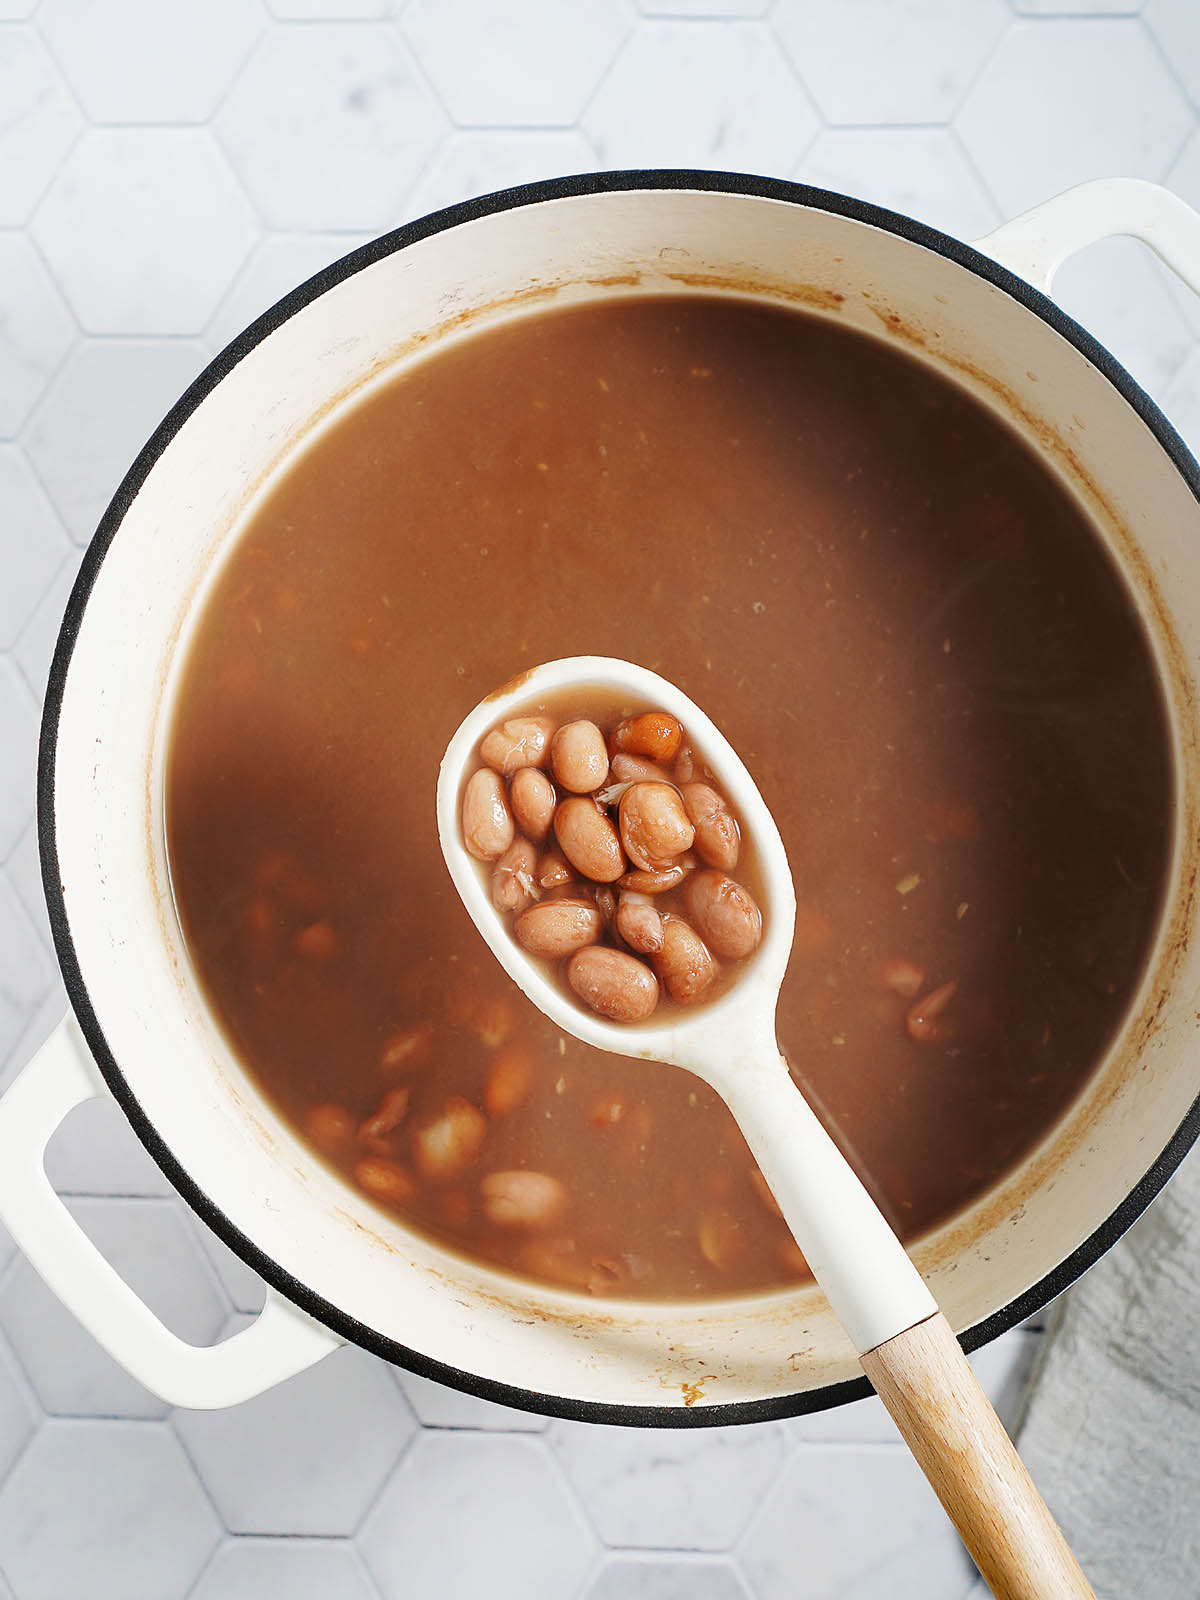 A pot with cooked beans and a white spoon holding some beans.